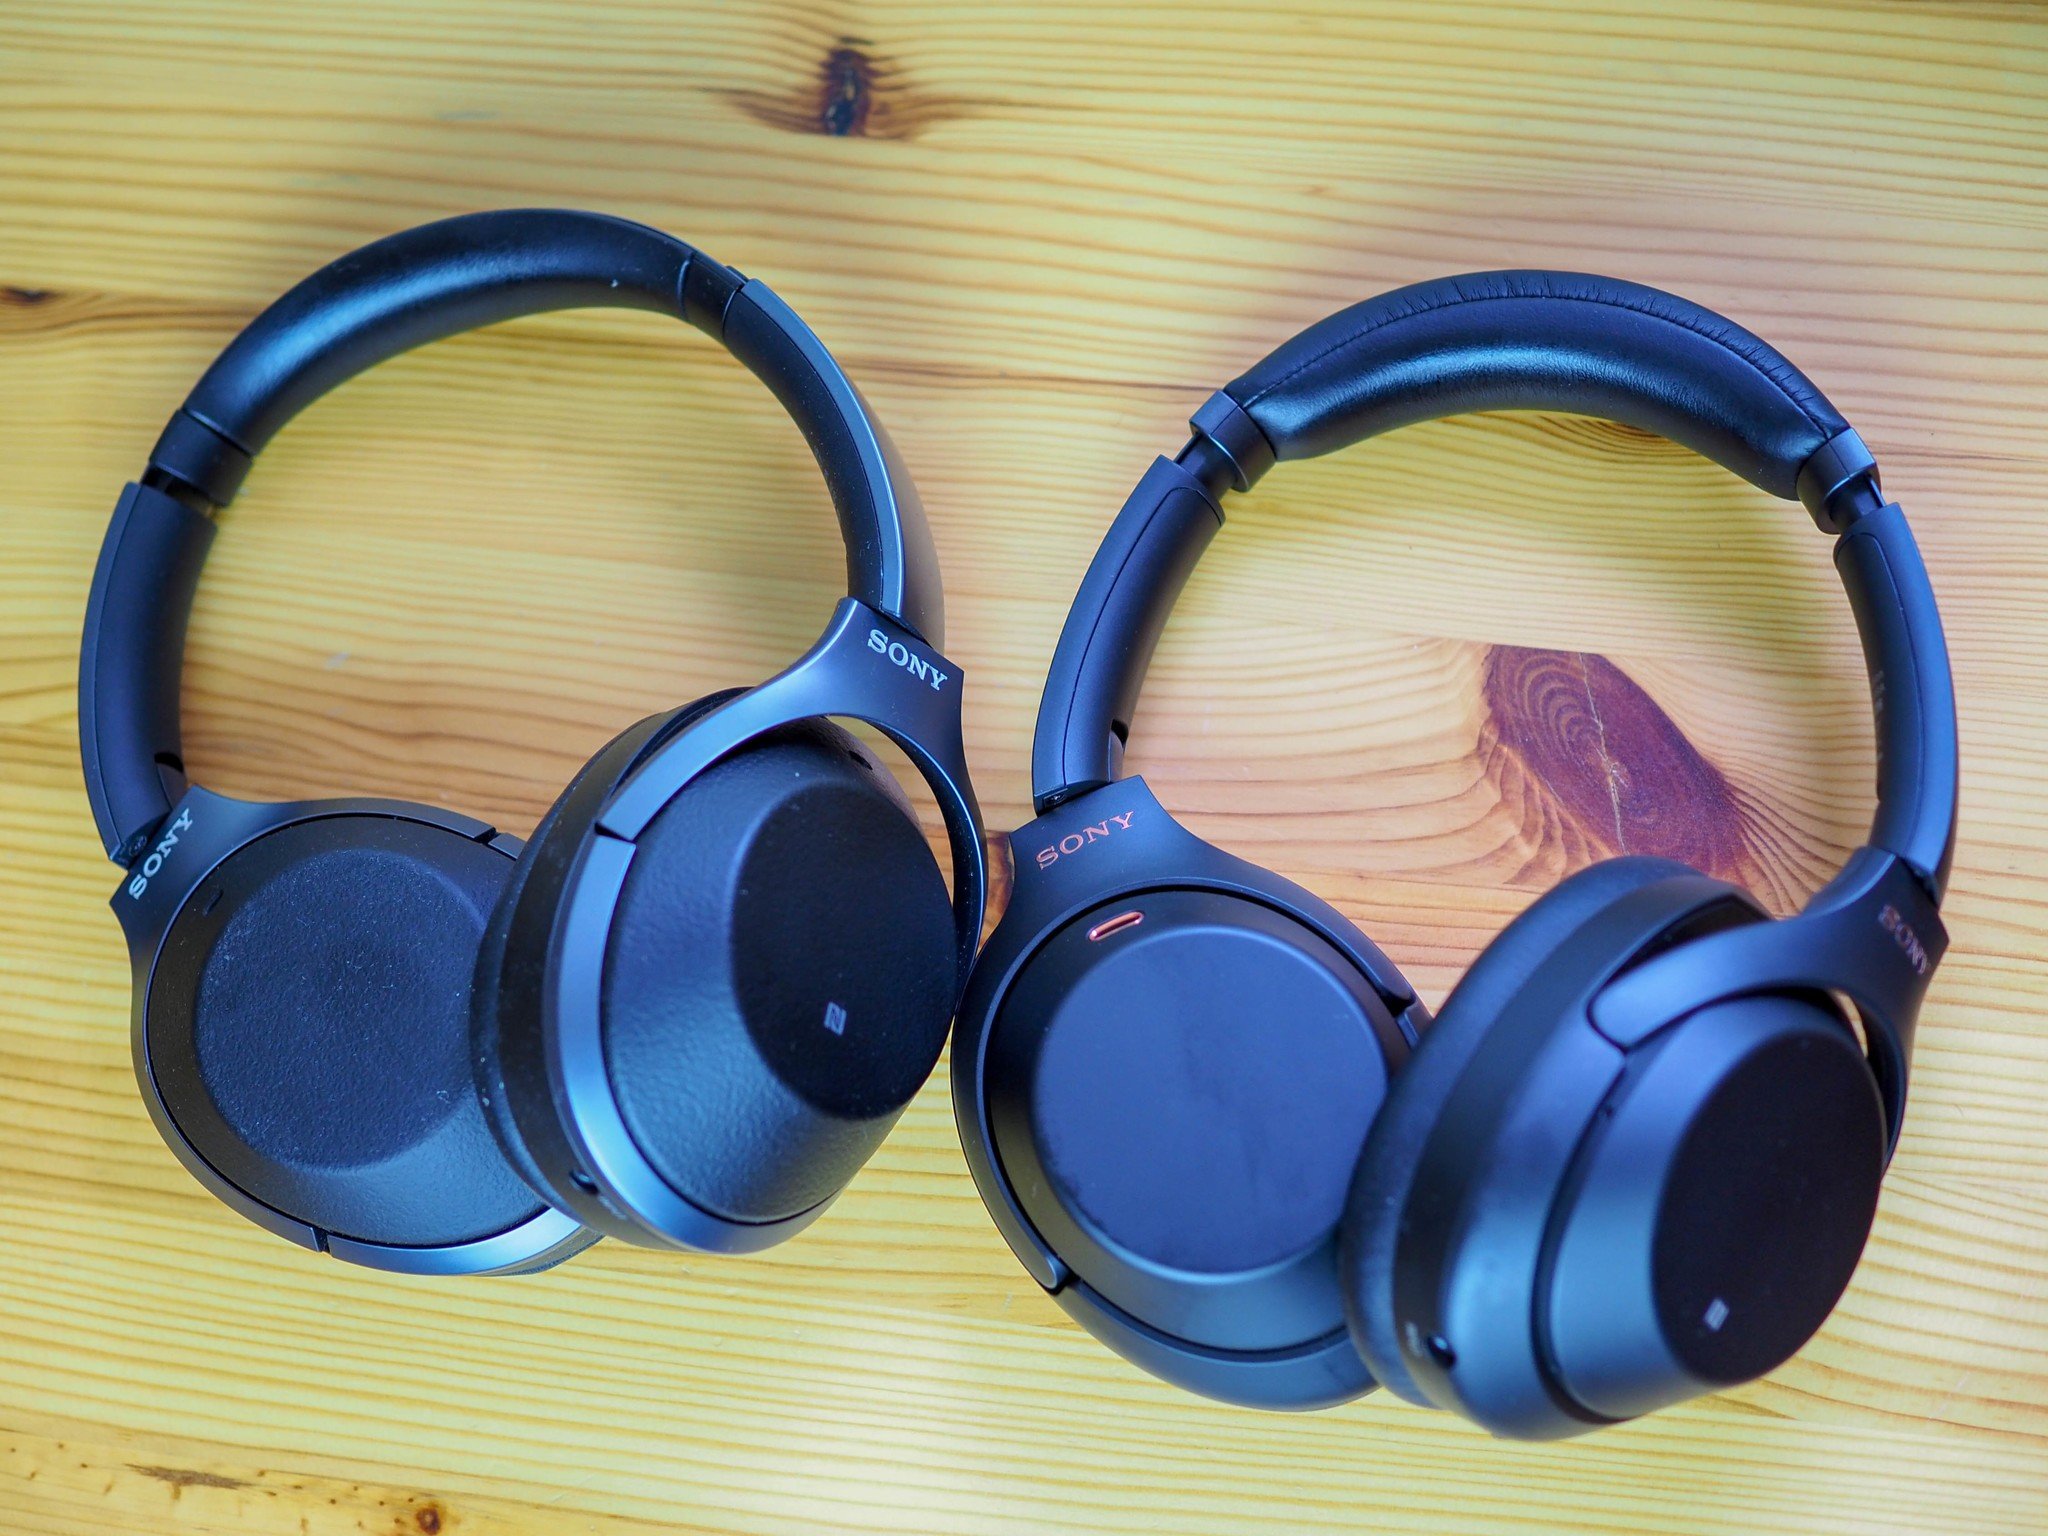 Sony WH-1000XM2 and WH-1000XM3 headphones